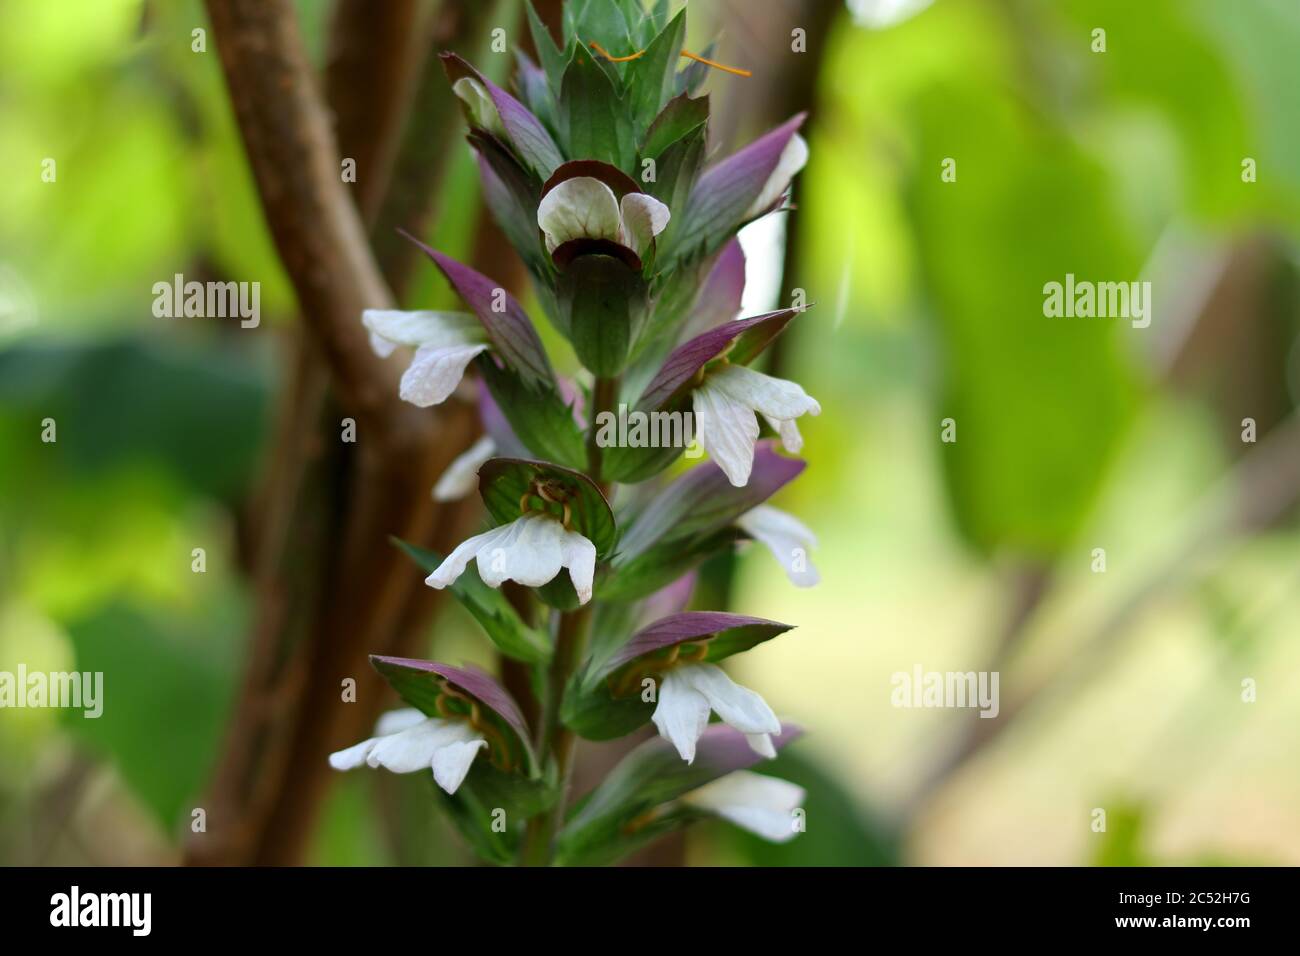 Selective shot of an Acanthus plant under the sunlight with a blurry background Stock Photo